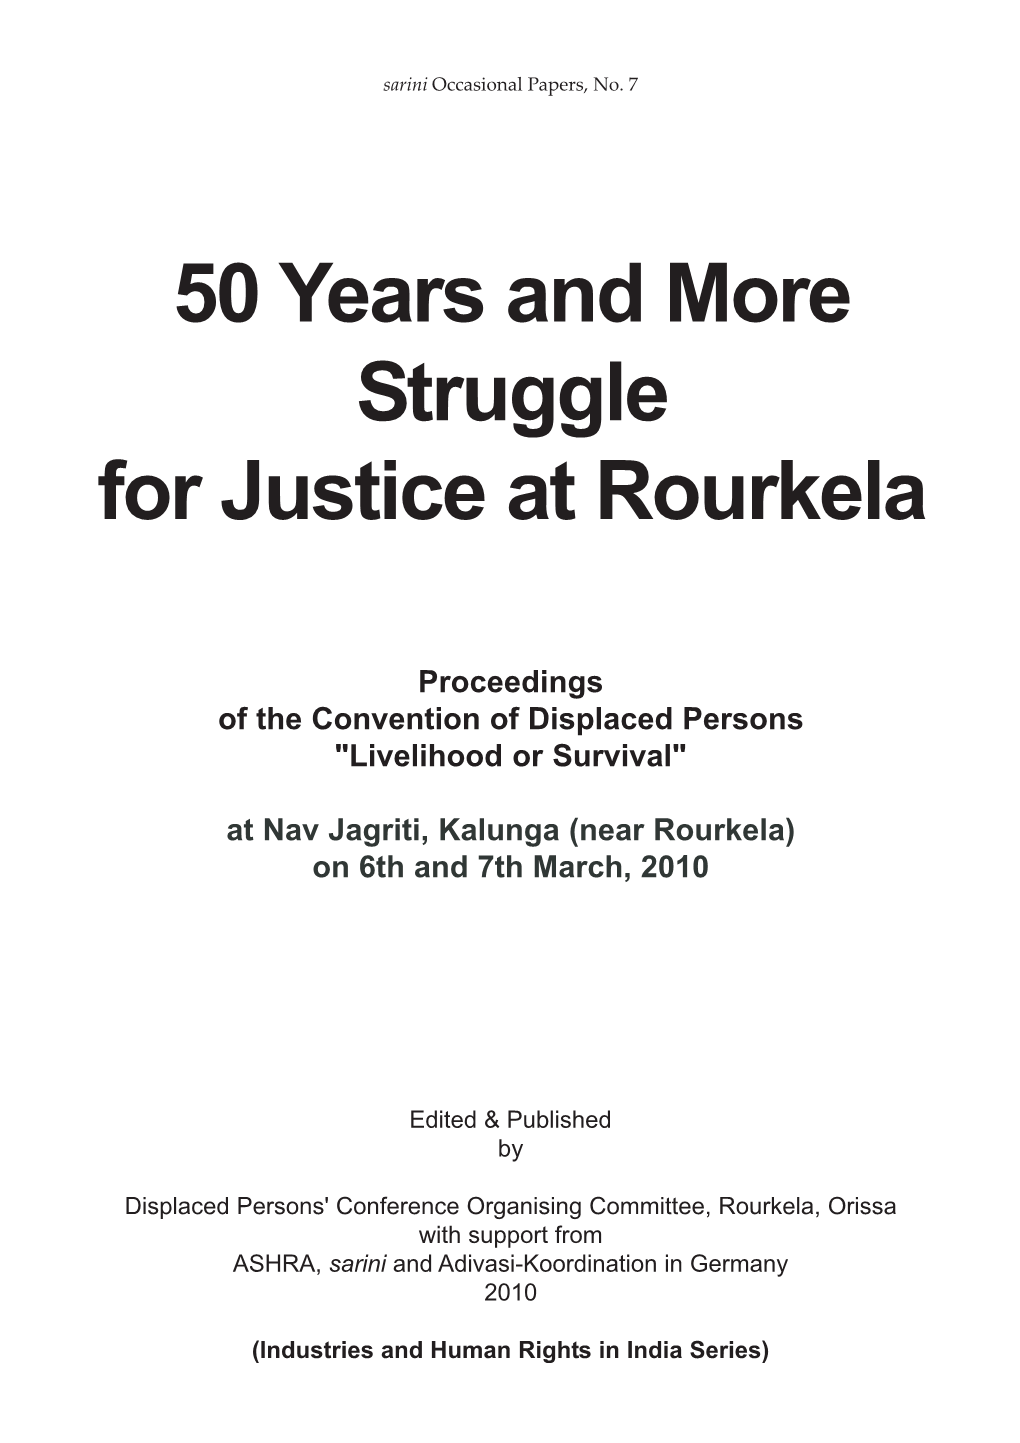 50 Years and More Struggle for Justice at Rourkela